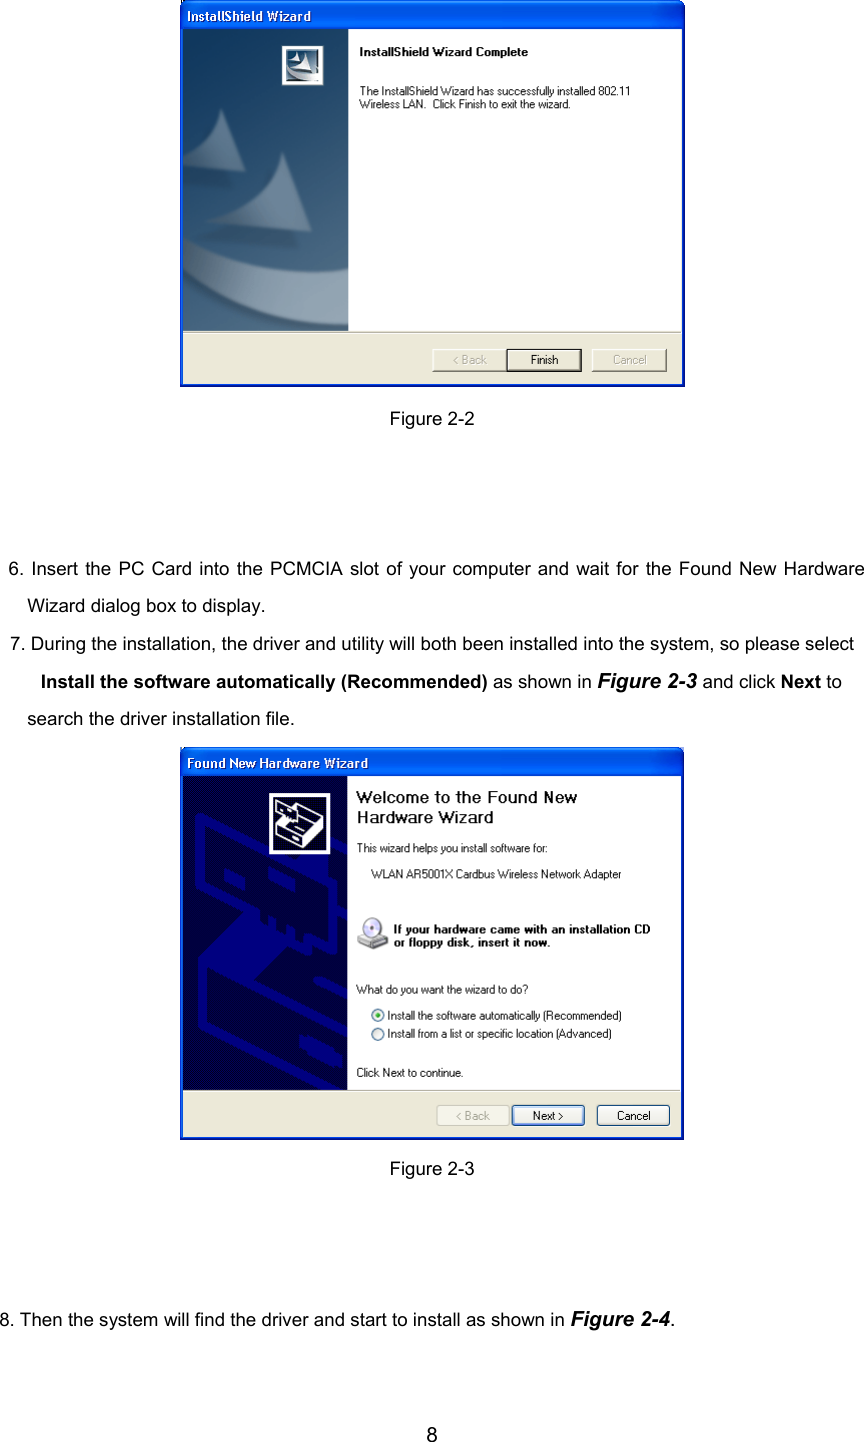 8Figure 2-26. Insert the PC Card into the PCMCIA slot of your computer and wait for the Found New HardwareWizard dialog box to display.7. During the installation, the driver and utility will both been installed into the system, so please select    Install the software automatically (Recommended) as shown in Figure 2-3 and click Next tosearch the driver installation file.Figure 2-38. Then the system will find the driver and start to install as shown in Figure 2-4.